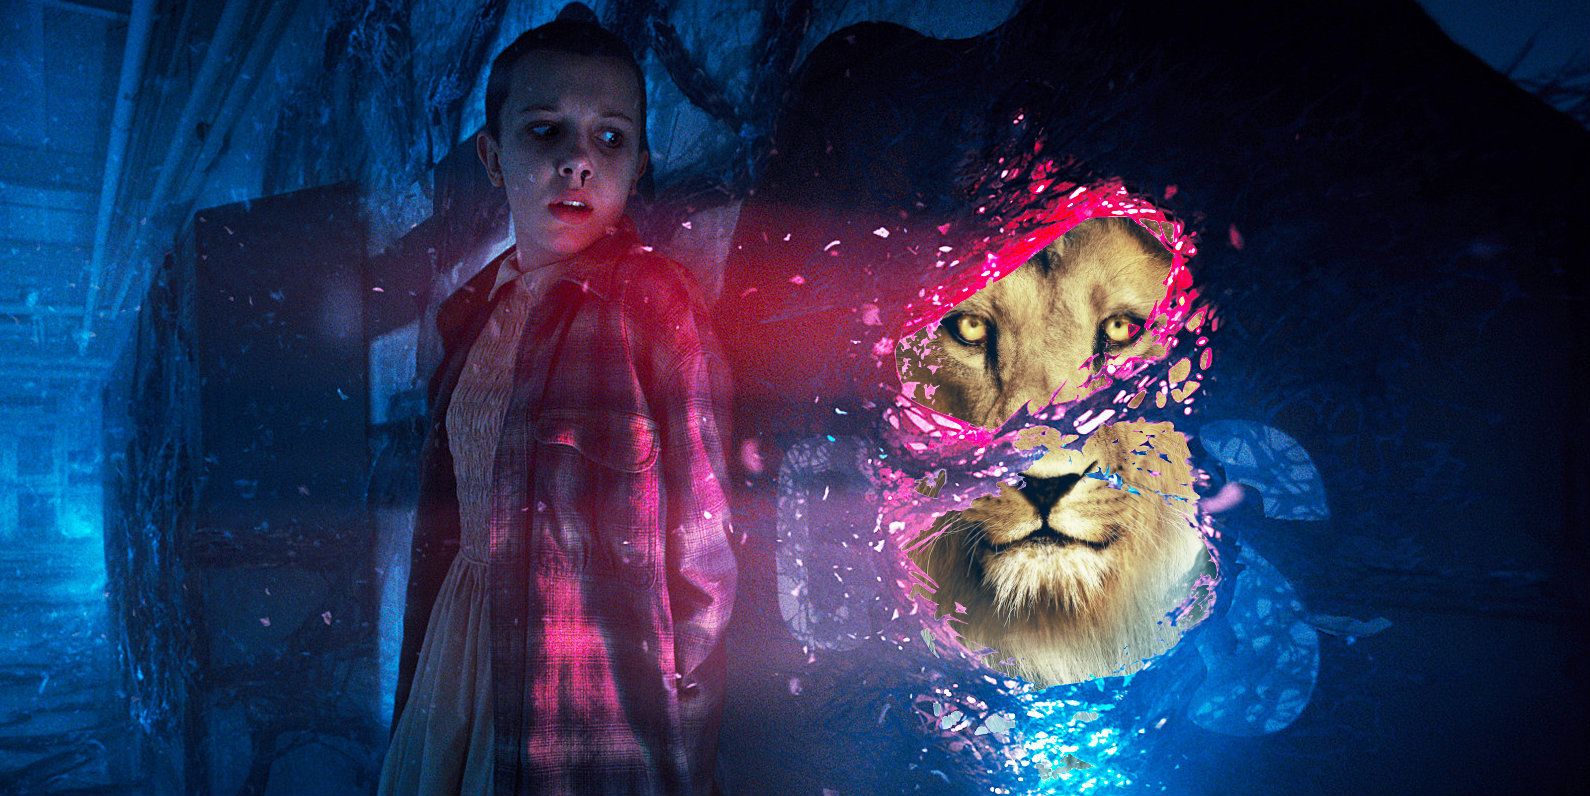 Chronicles of Narnia film series rebooting with The Silver Chair